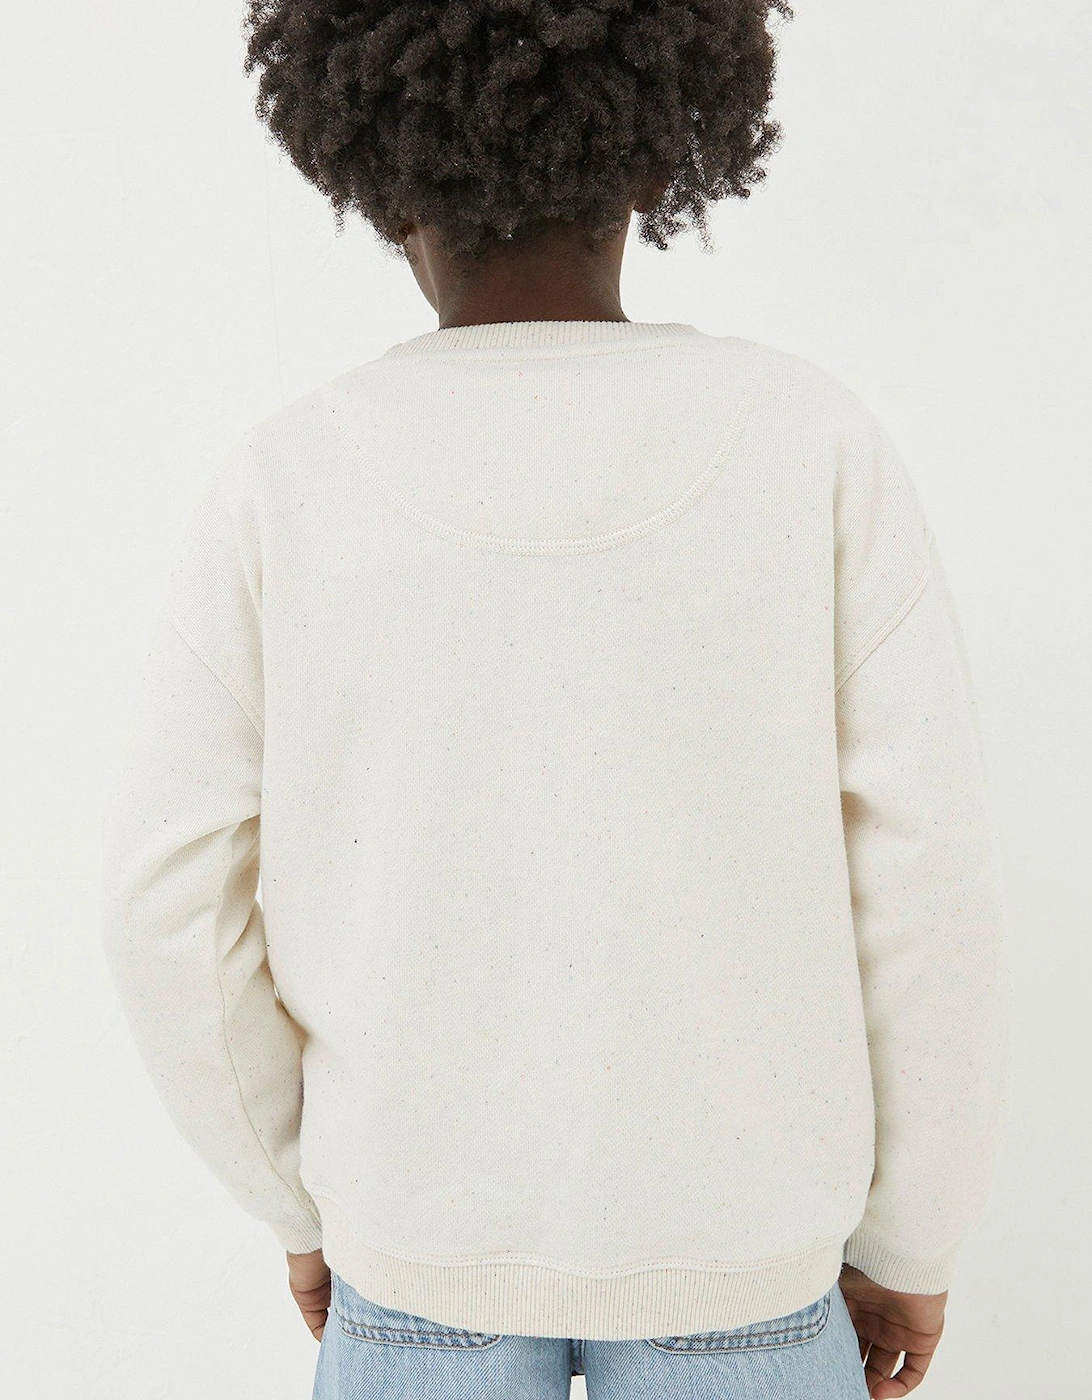 Girls Butterfly Crew Neck Sweat - Natural White